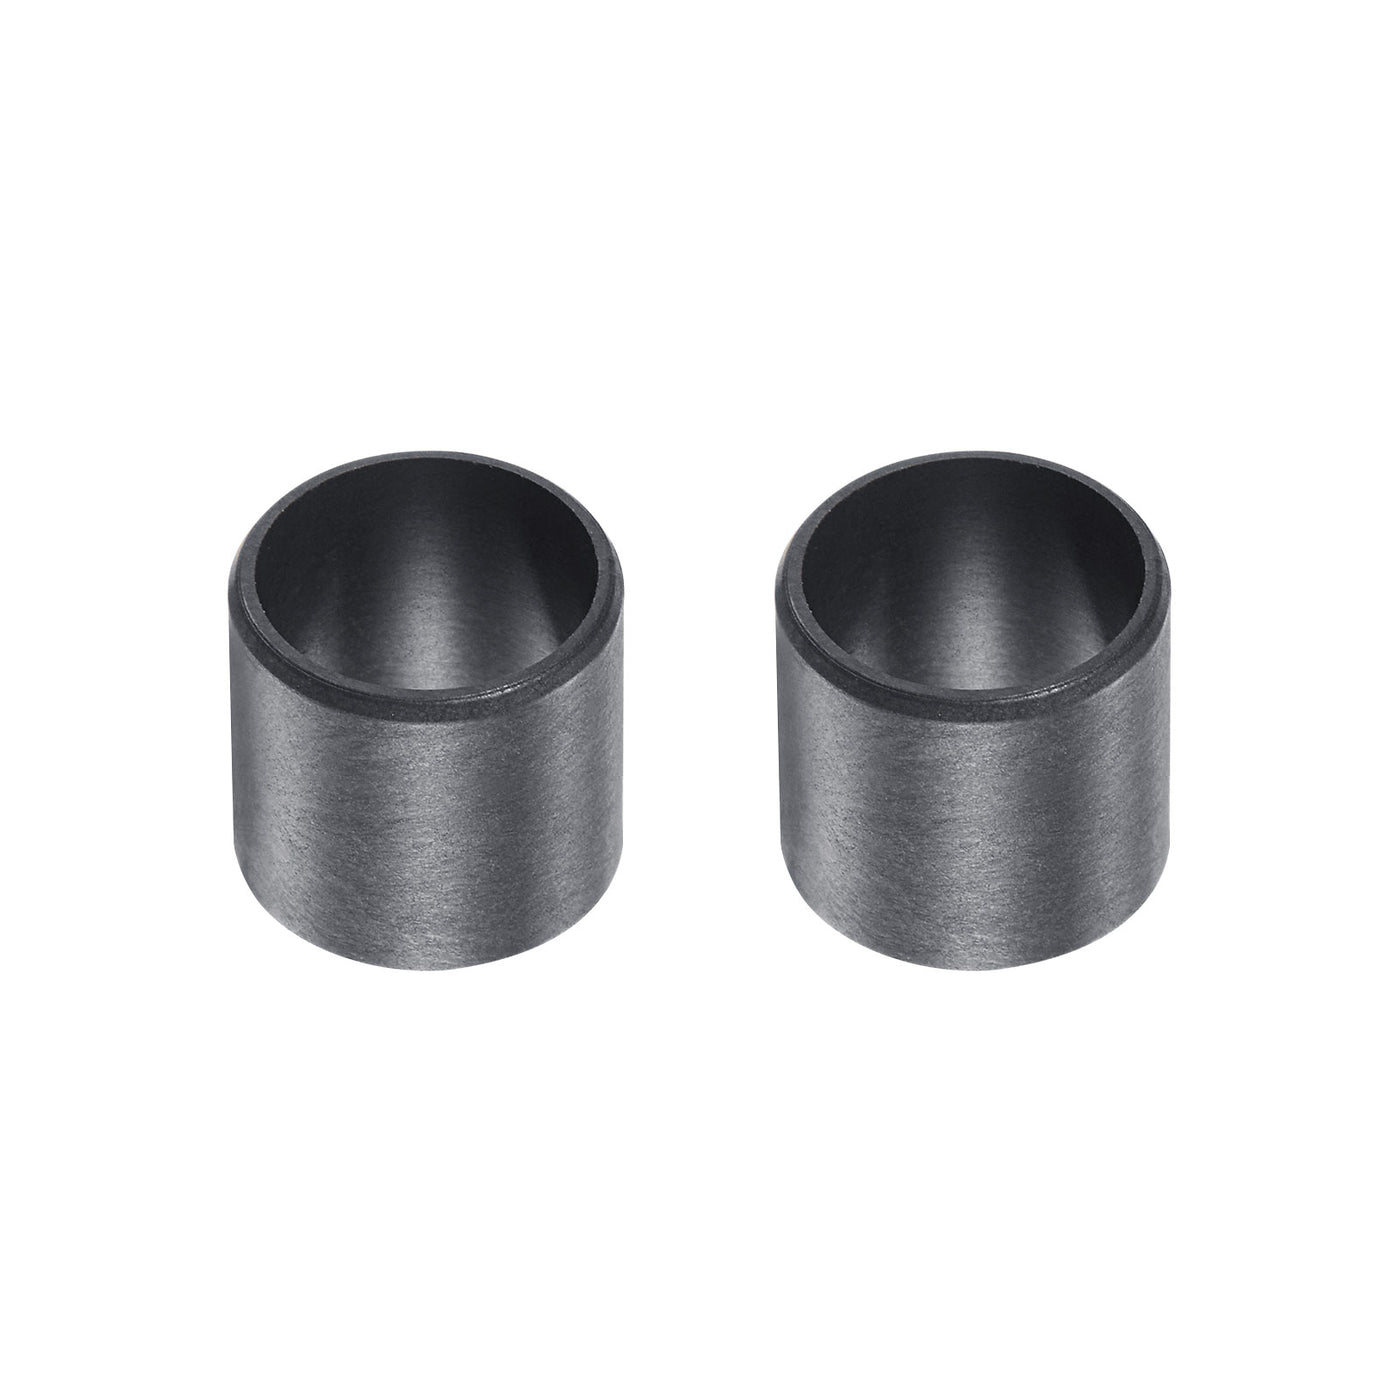 uxcell Uxcell Sleeve Bearings 12mmx14mmx10mm POM Wrapped Oilless Bushings Black 2pcs